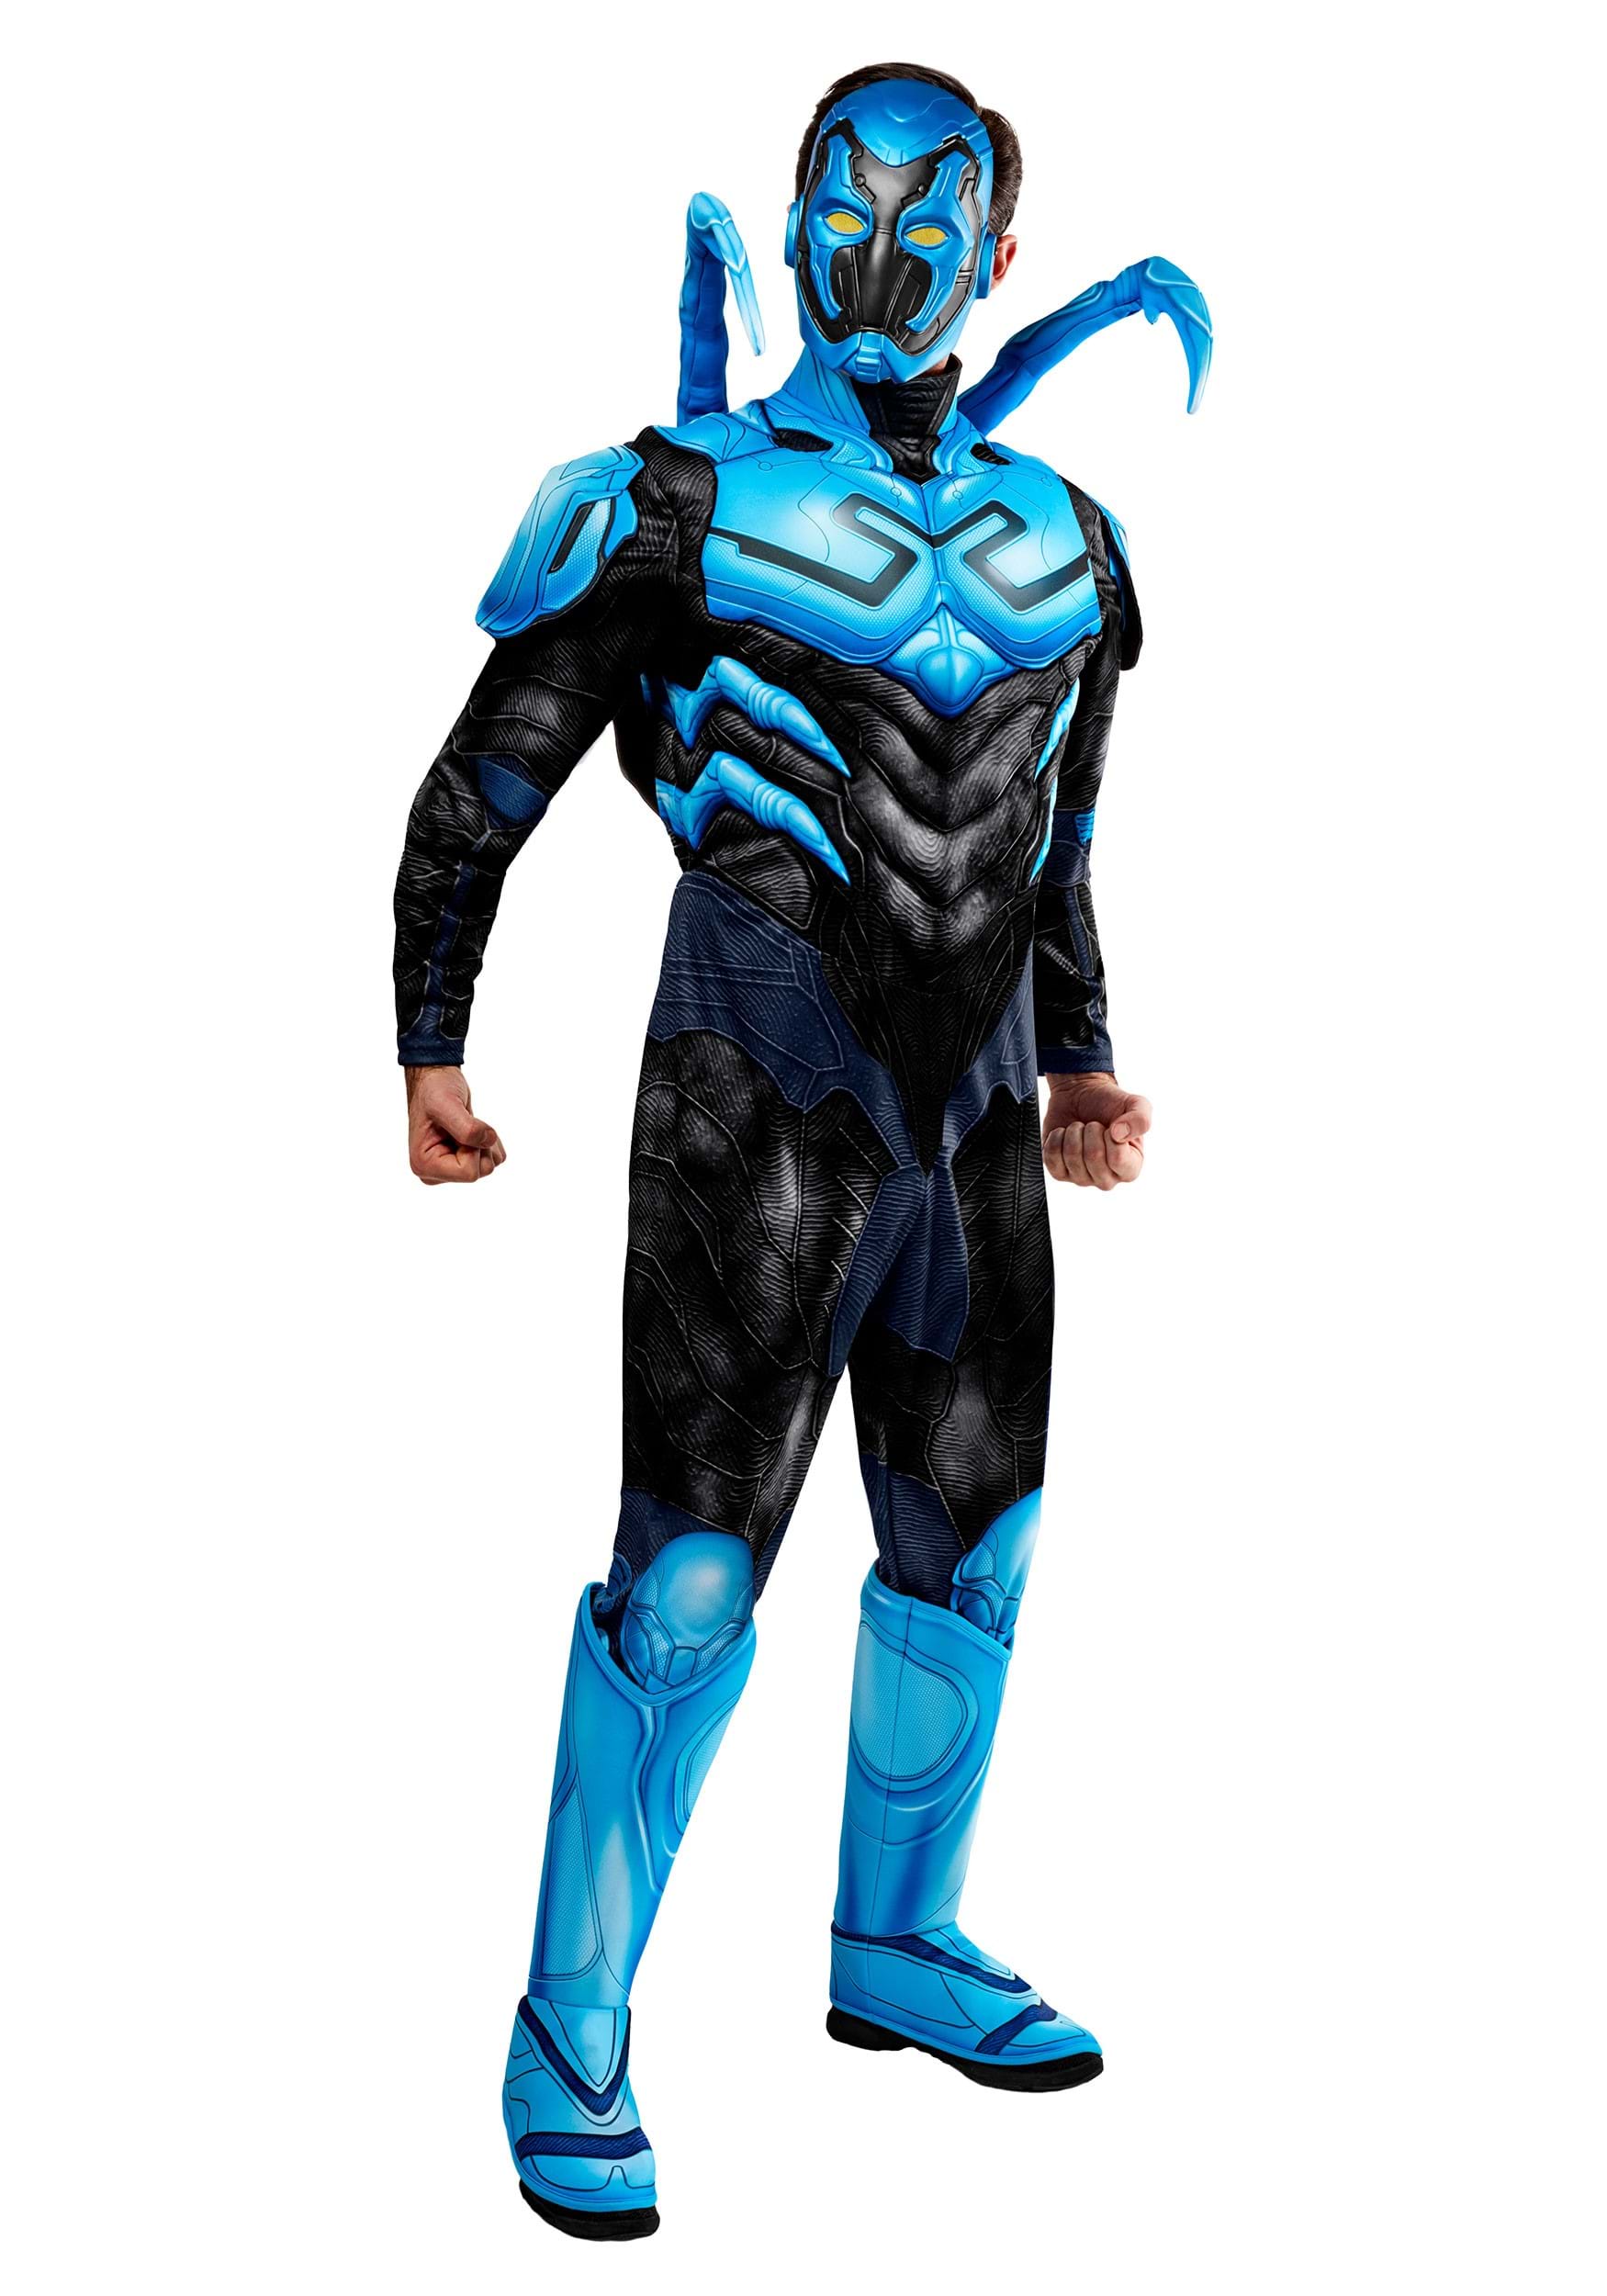 https://images.halloweencostumes.ca/products/93062/1-1/blue-beetle-mens-deluxe-costume.jpg